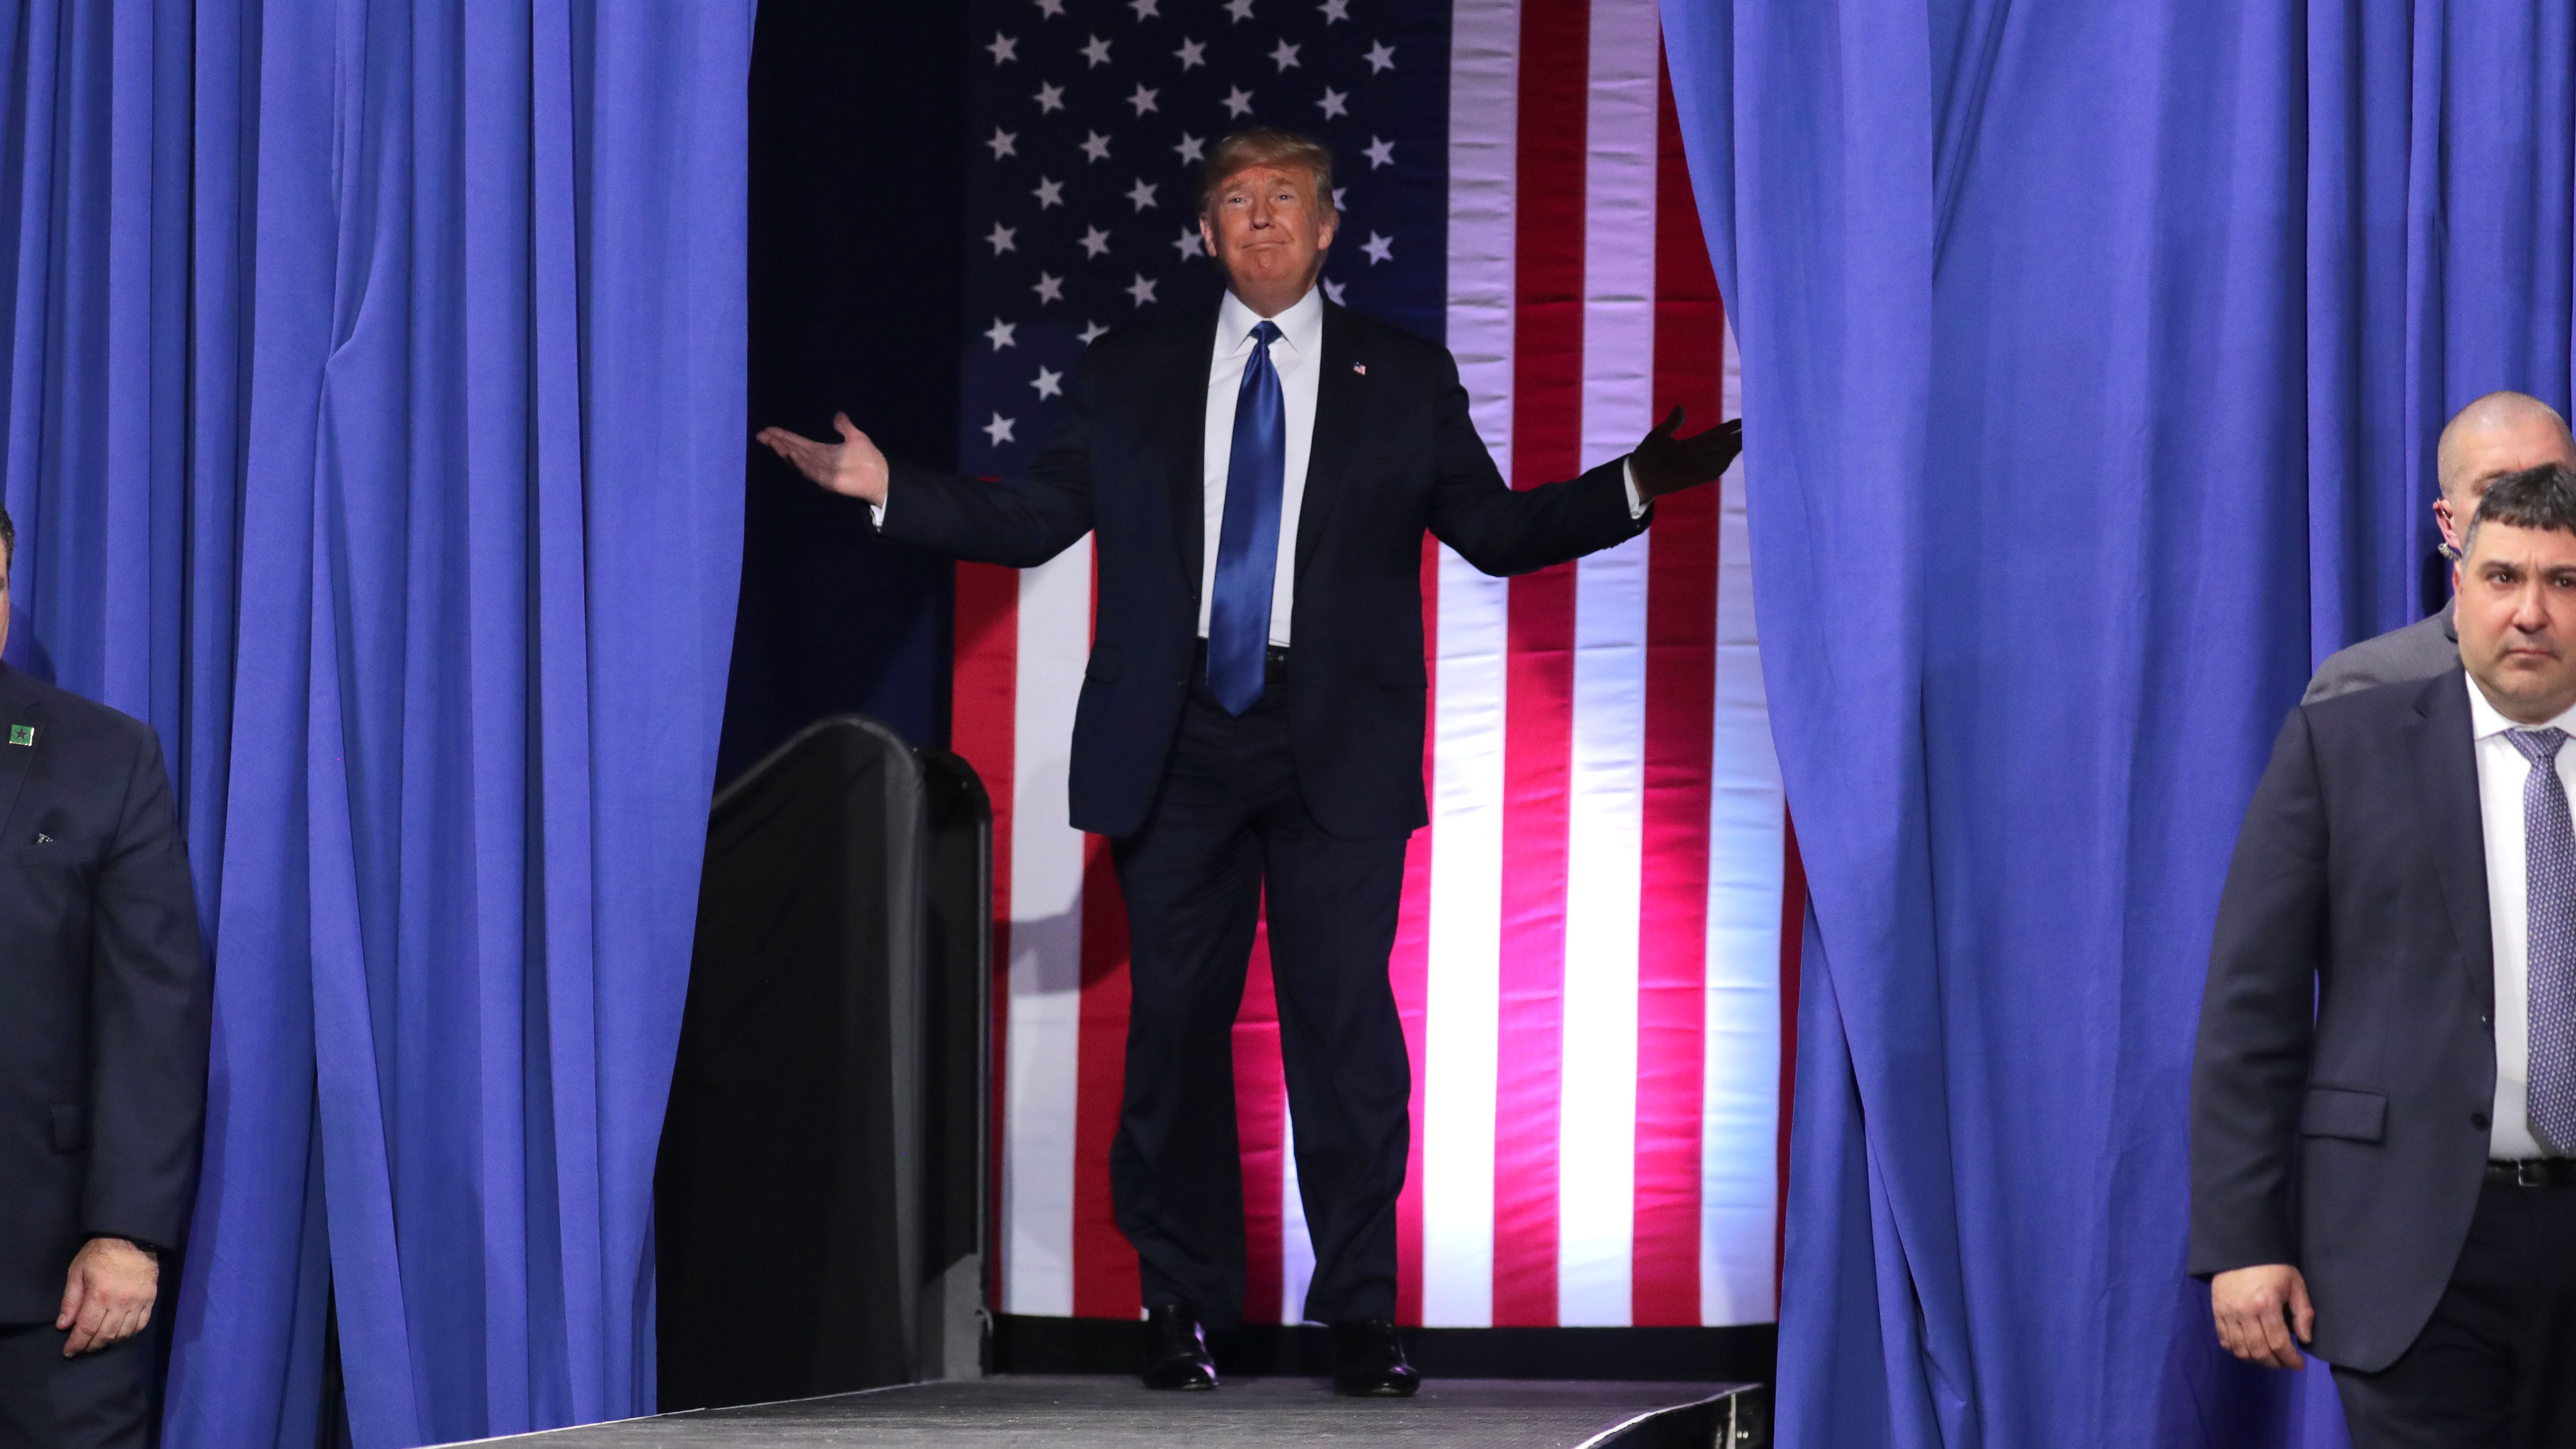 President Donald Trump acknowledges the crowd before he speaks at the UW-Milwaukee Panther Arena on Tuesday.